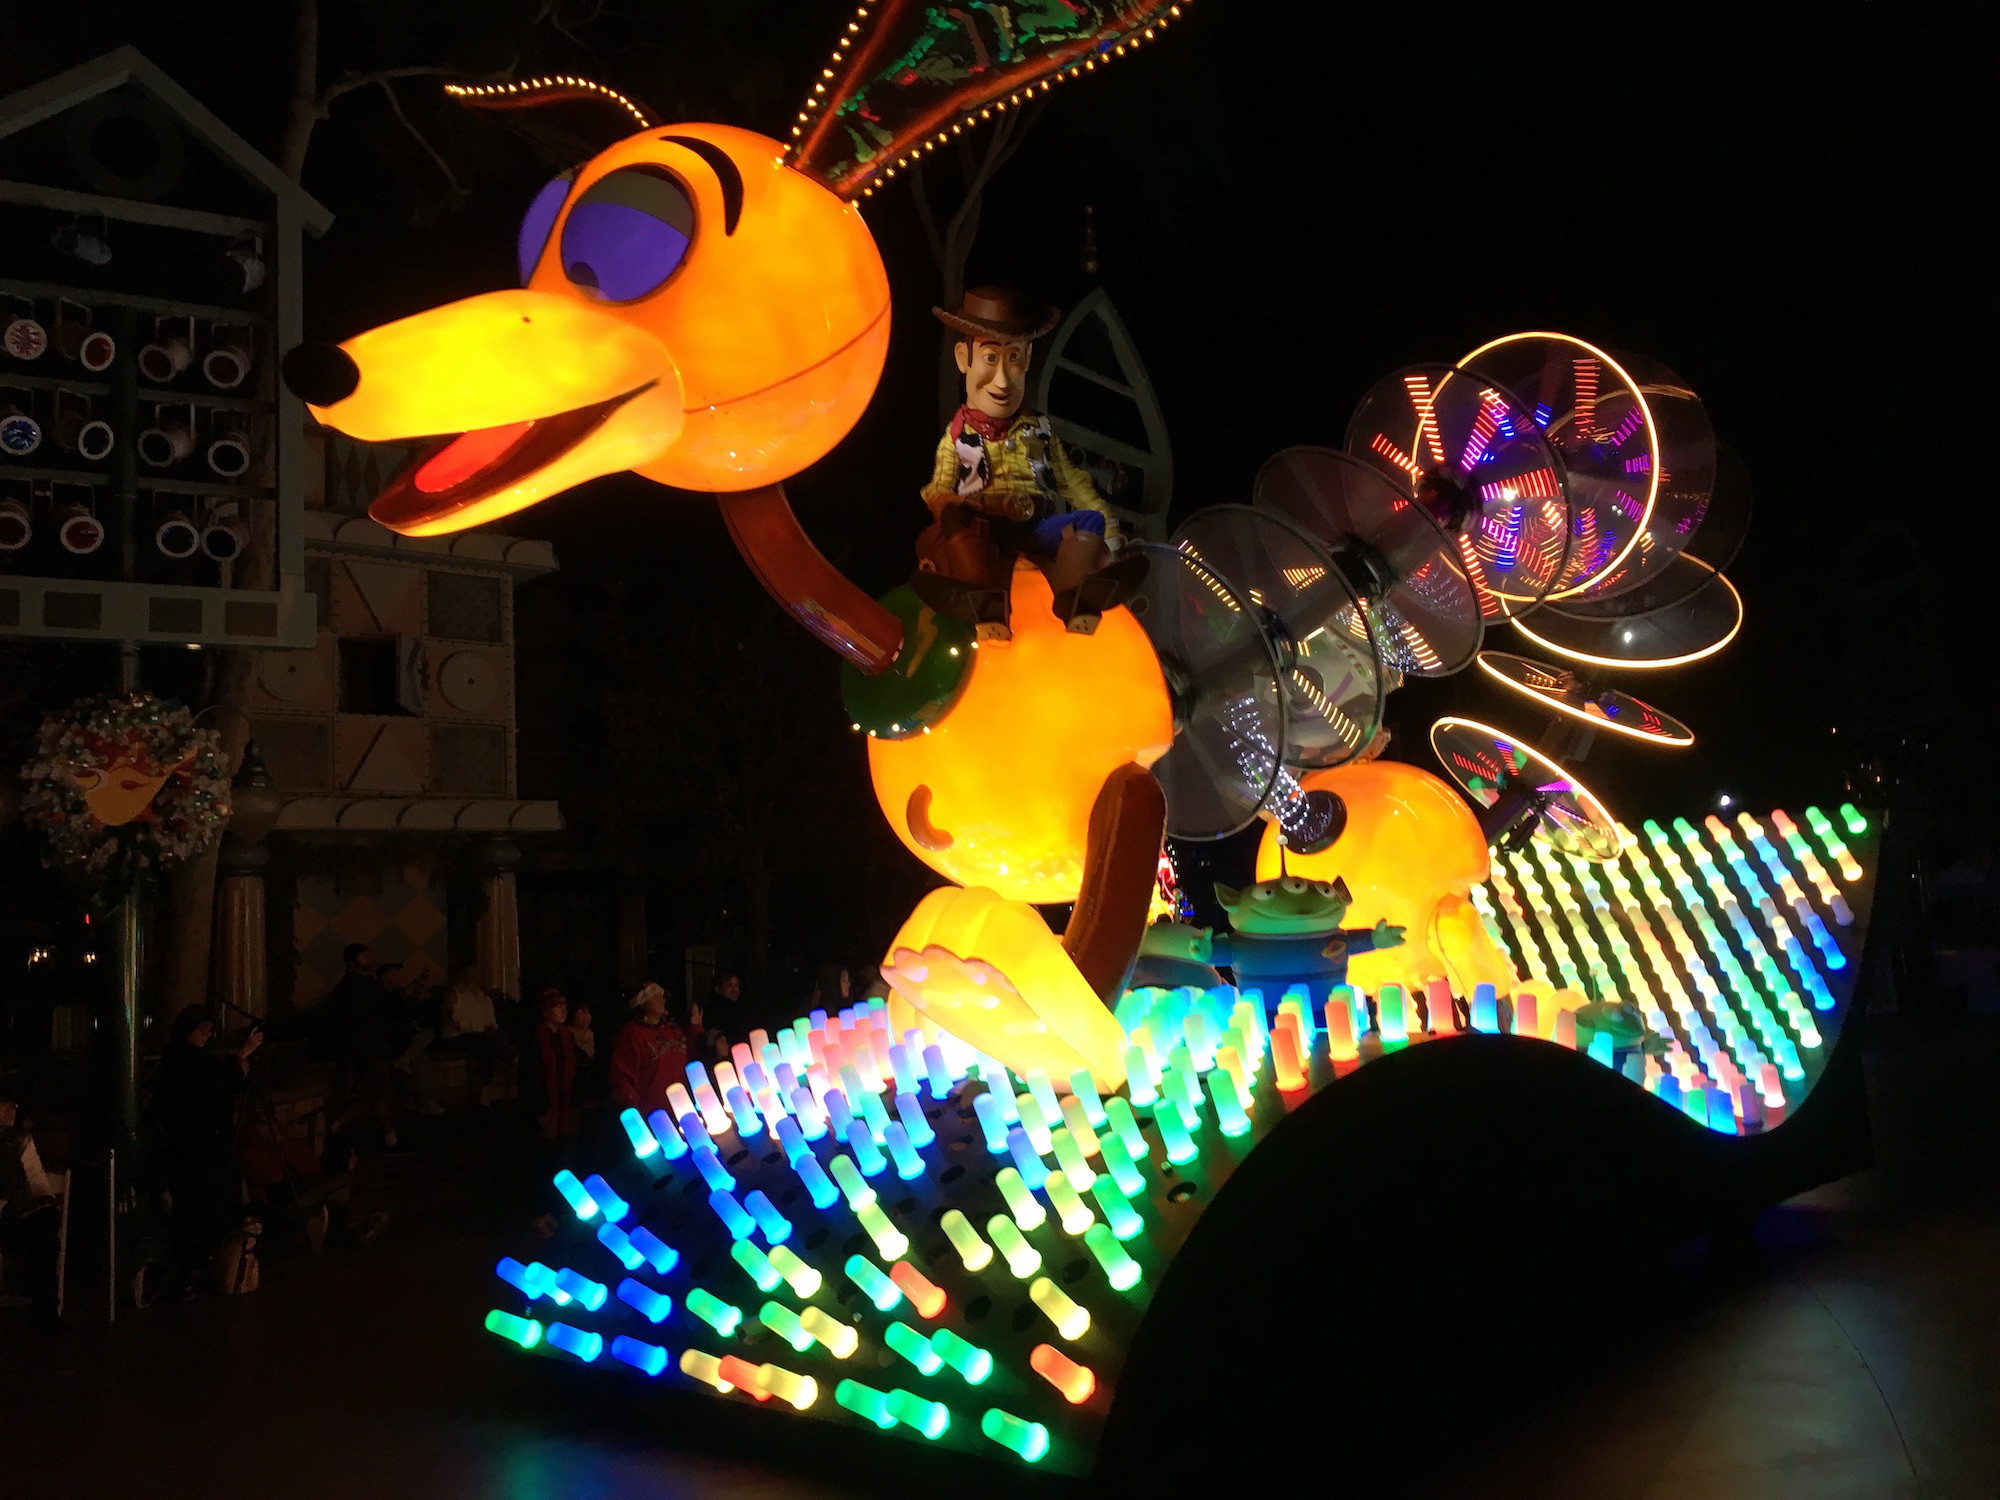 Main Street Electrical Parade Toy Story